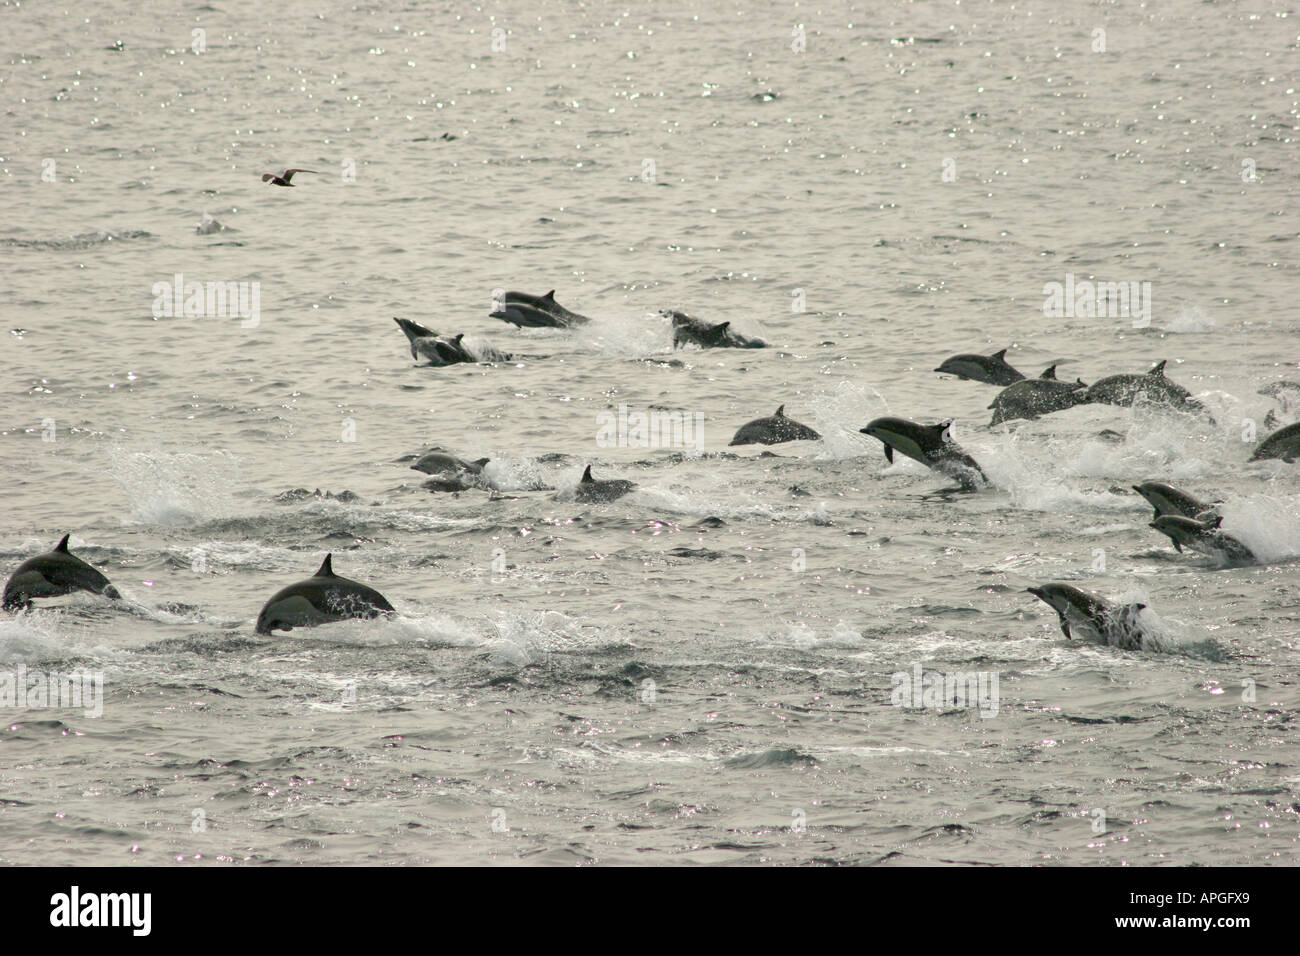 Group of Common Dolphins leaping clear of water Stock Photo